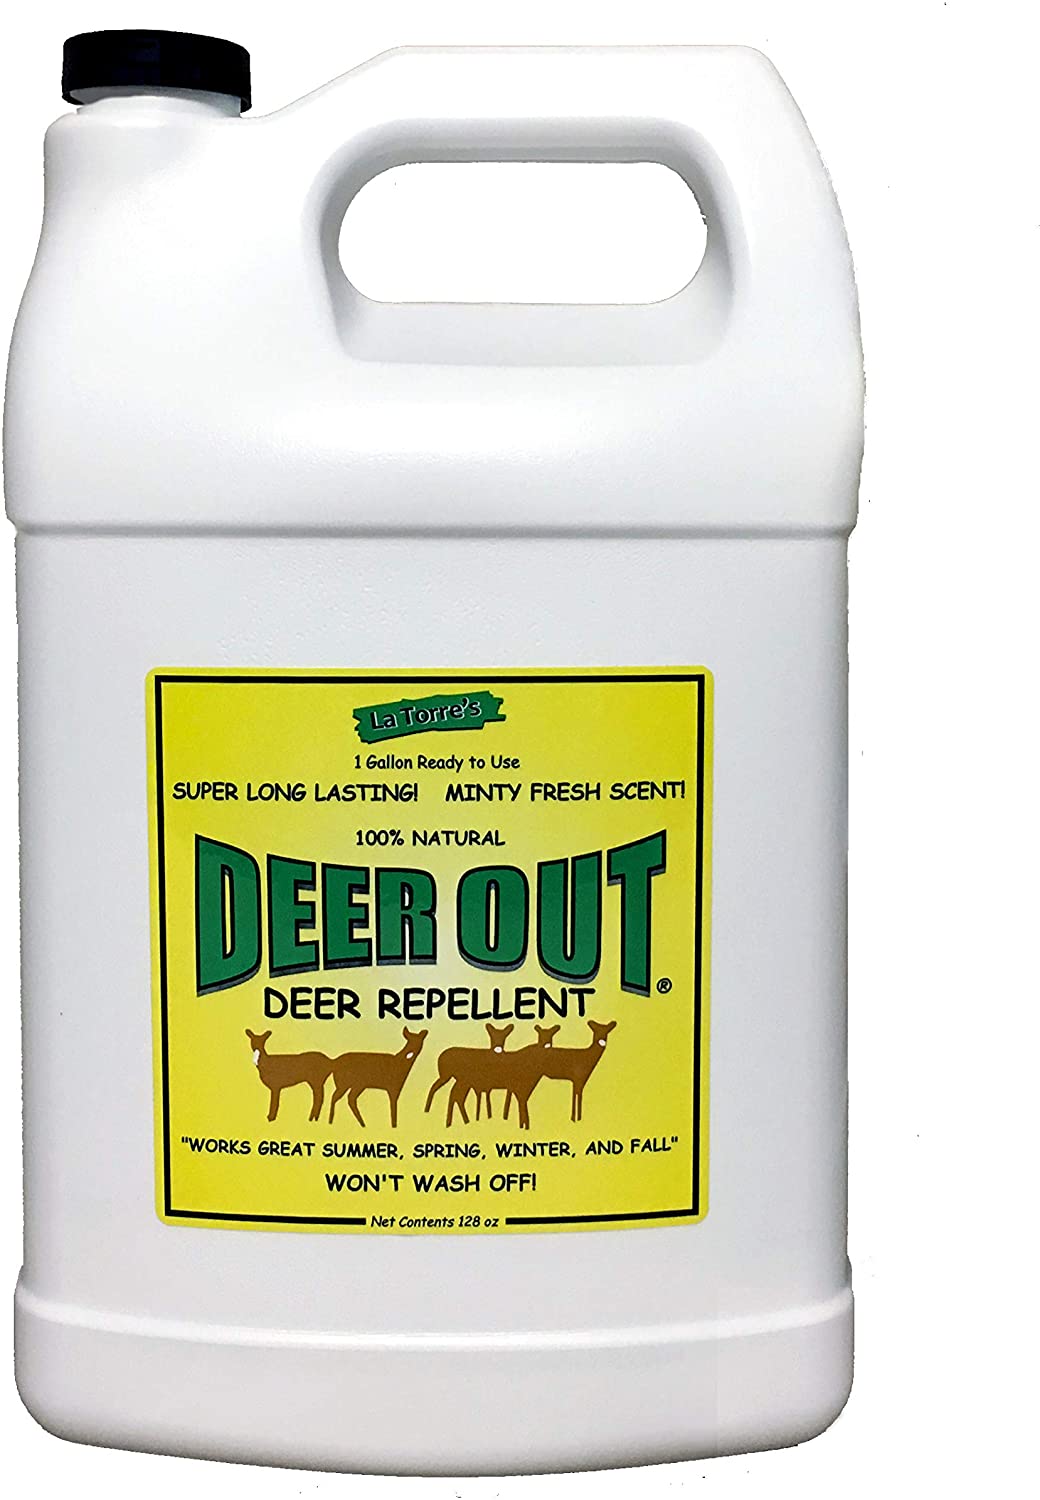 Deer Out Ready-To-Use Deer Repellent, 1-Gallon Refill